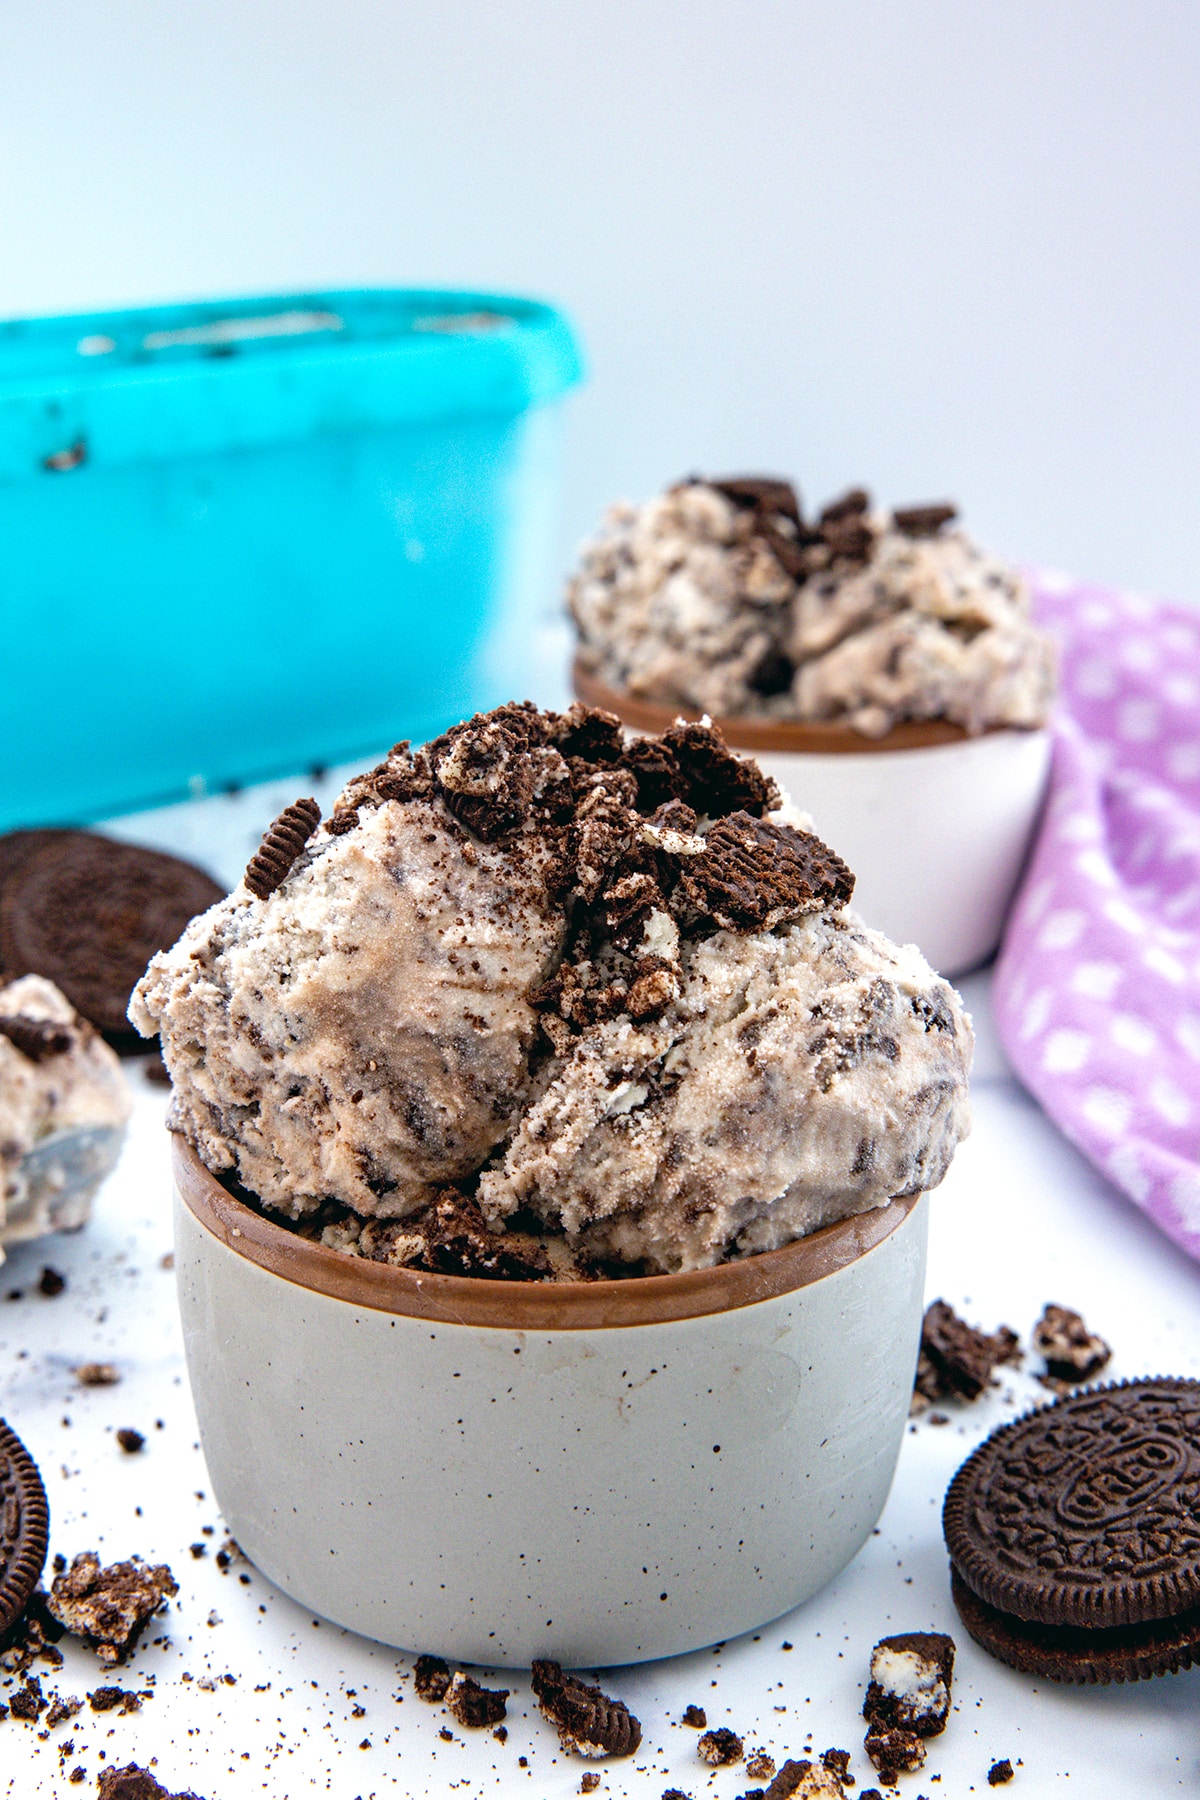 Head-on view of a bowl of Oreo ice cream with second bowl and container in background and Oreo cookies all around.